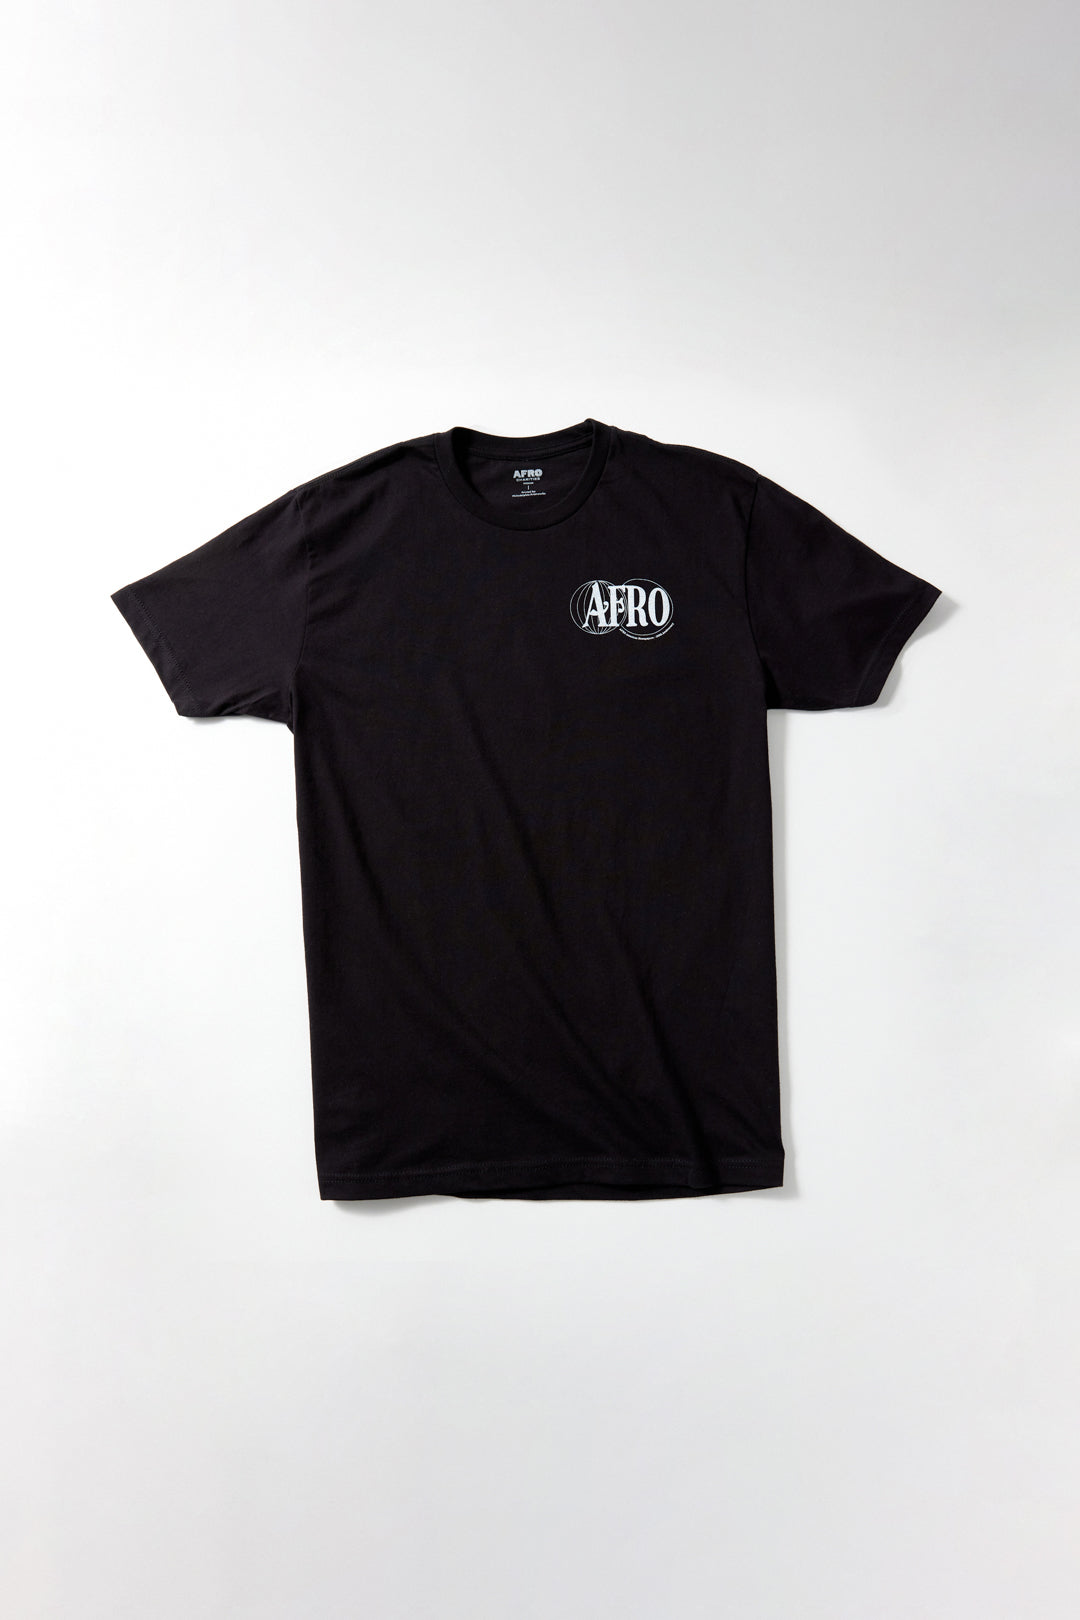 PPW for AFRO T-Shirt front